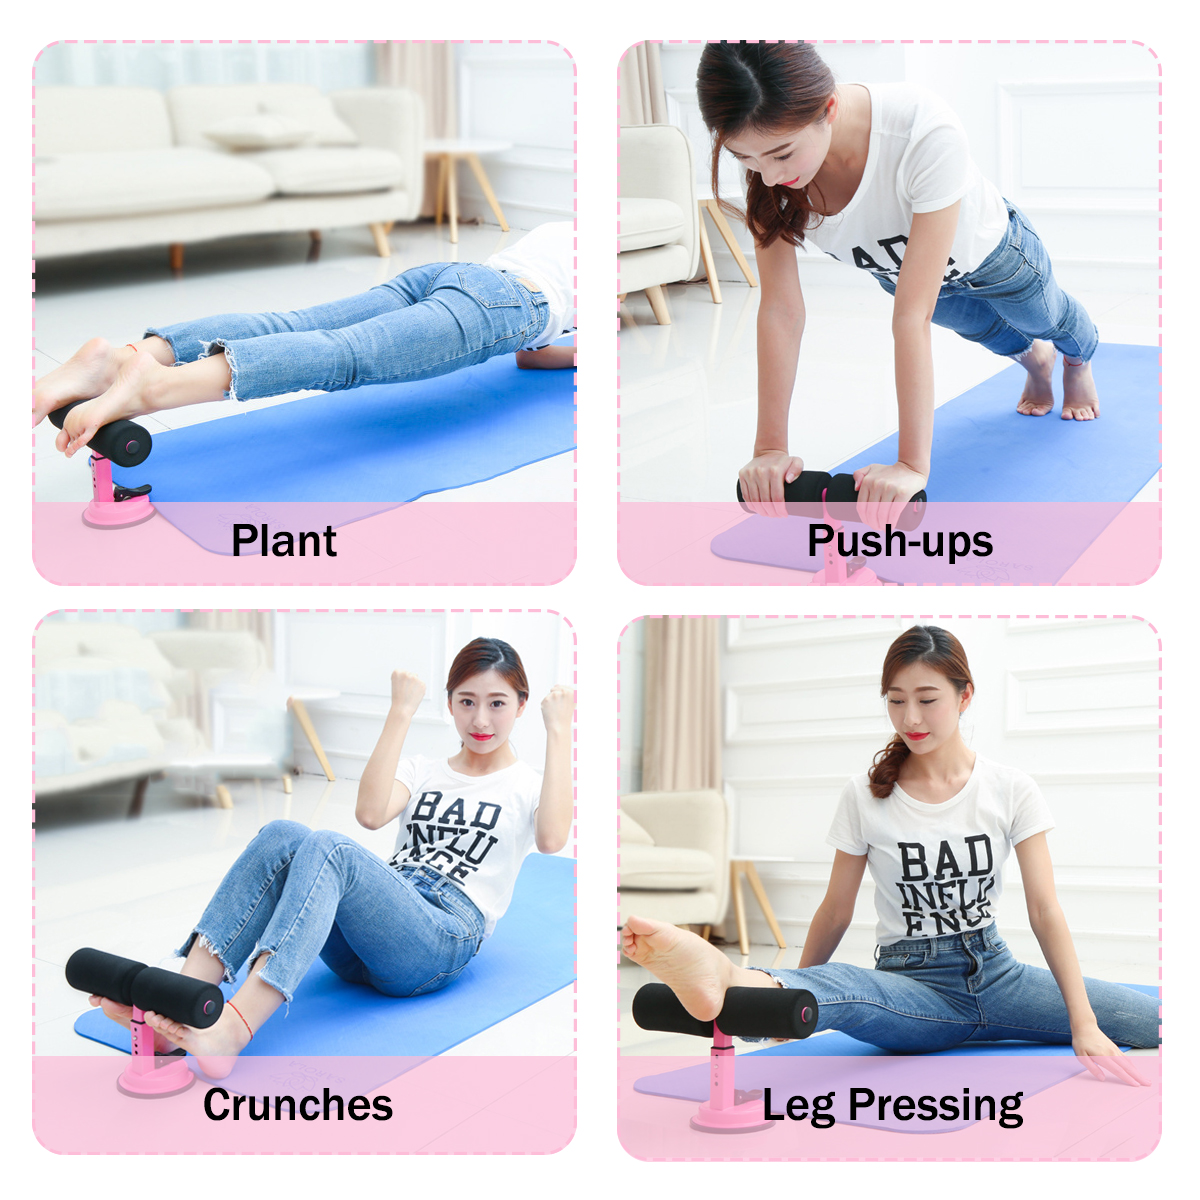 Adjustable-Sit-Up-Assistant-Bars-Abdominal-Core-Fitness-Workout-Stand-Portable-Situp-Suction-Home-Gy-1697292-2